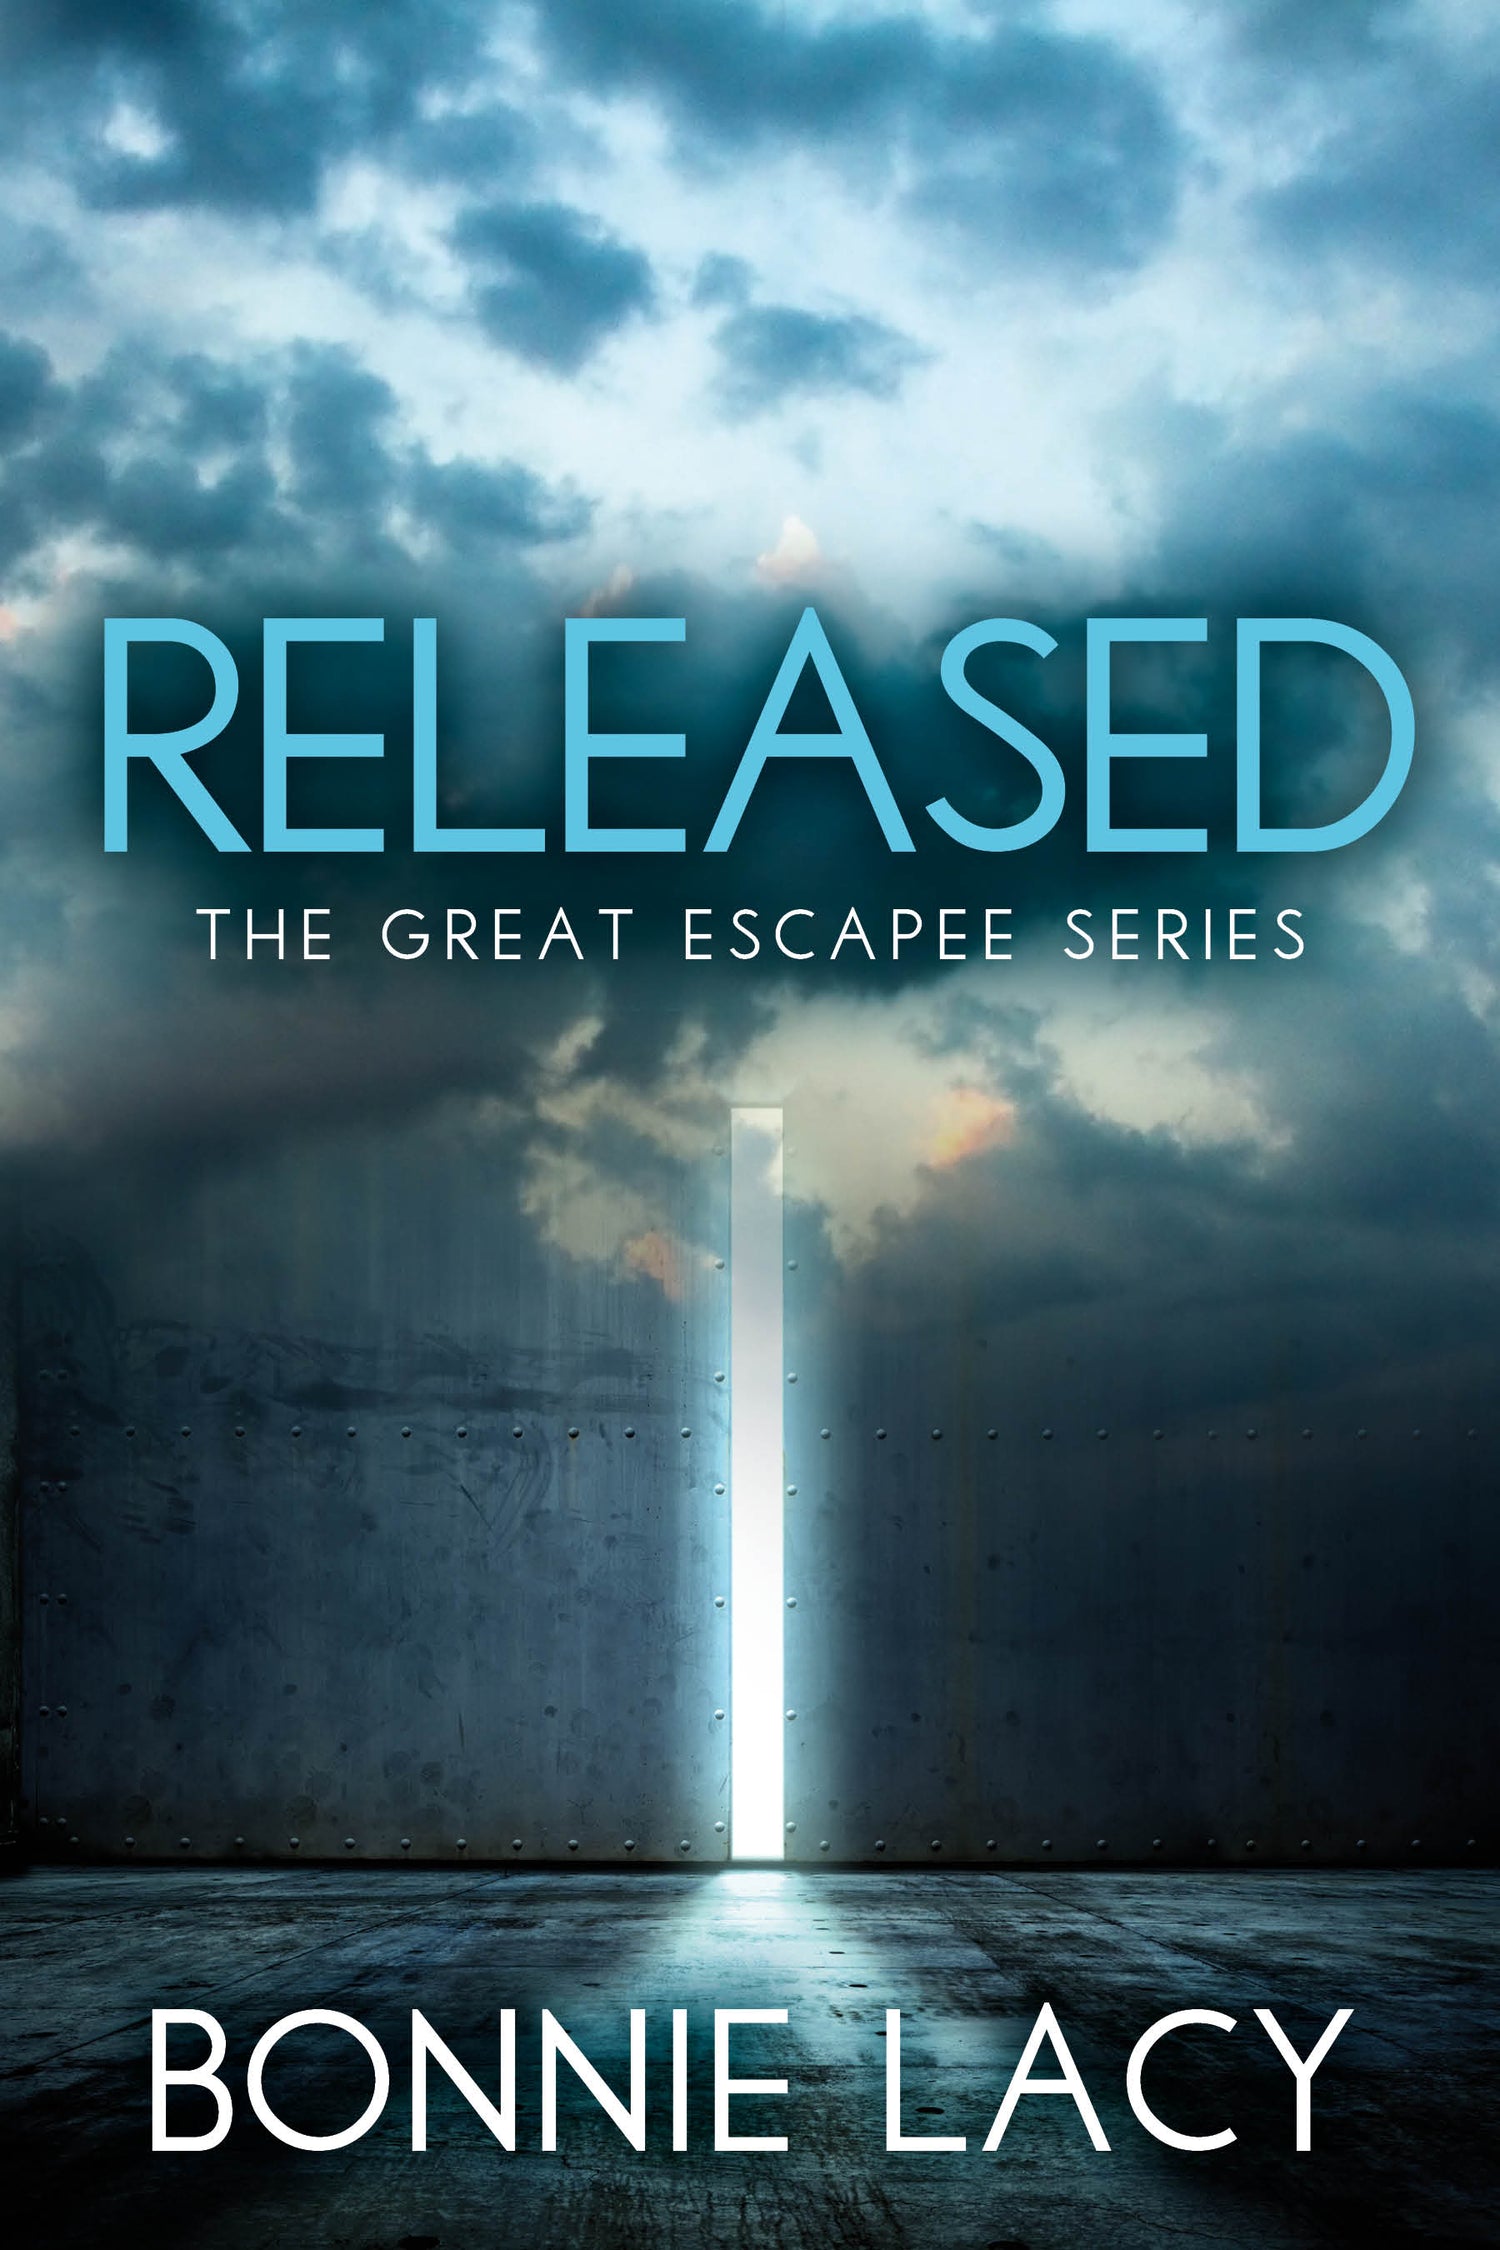 The Great Escapee Series